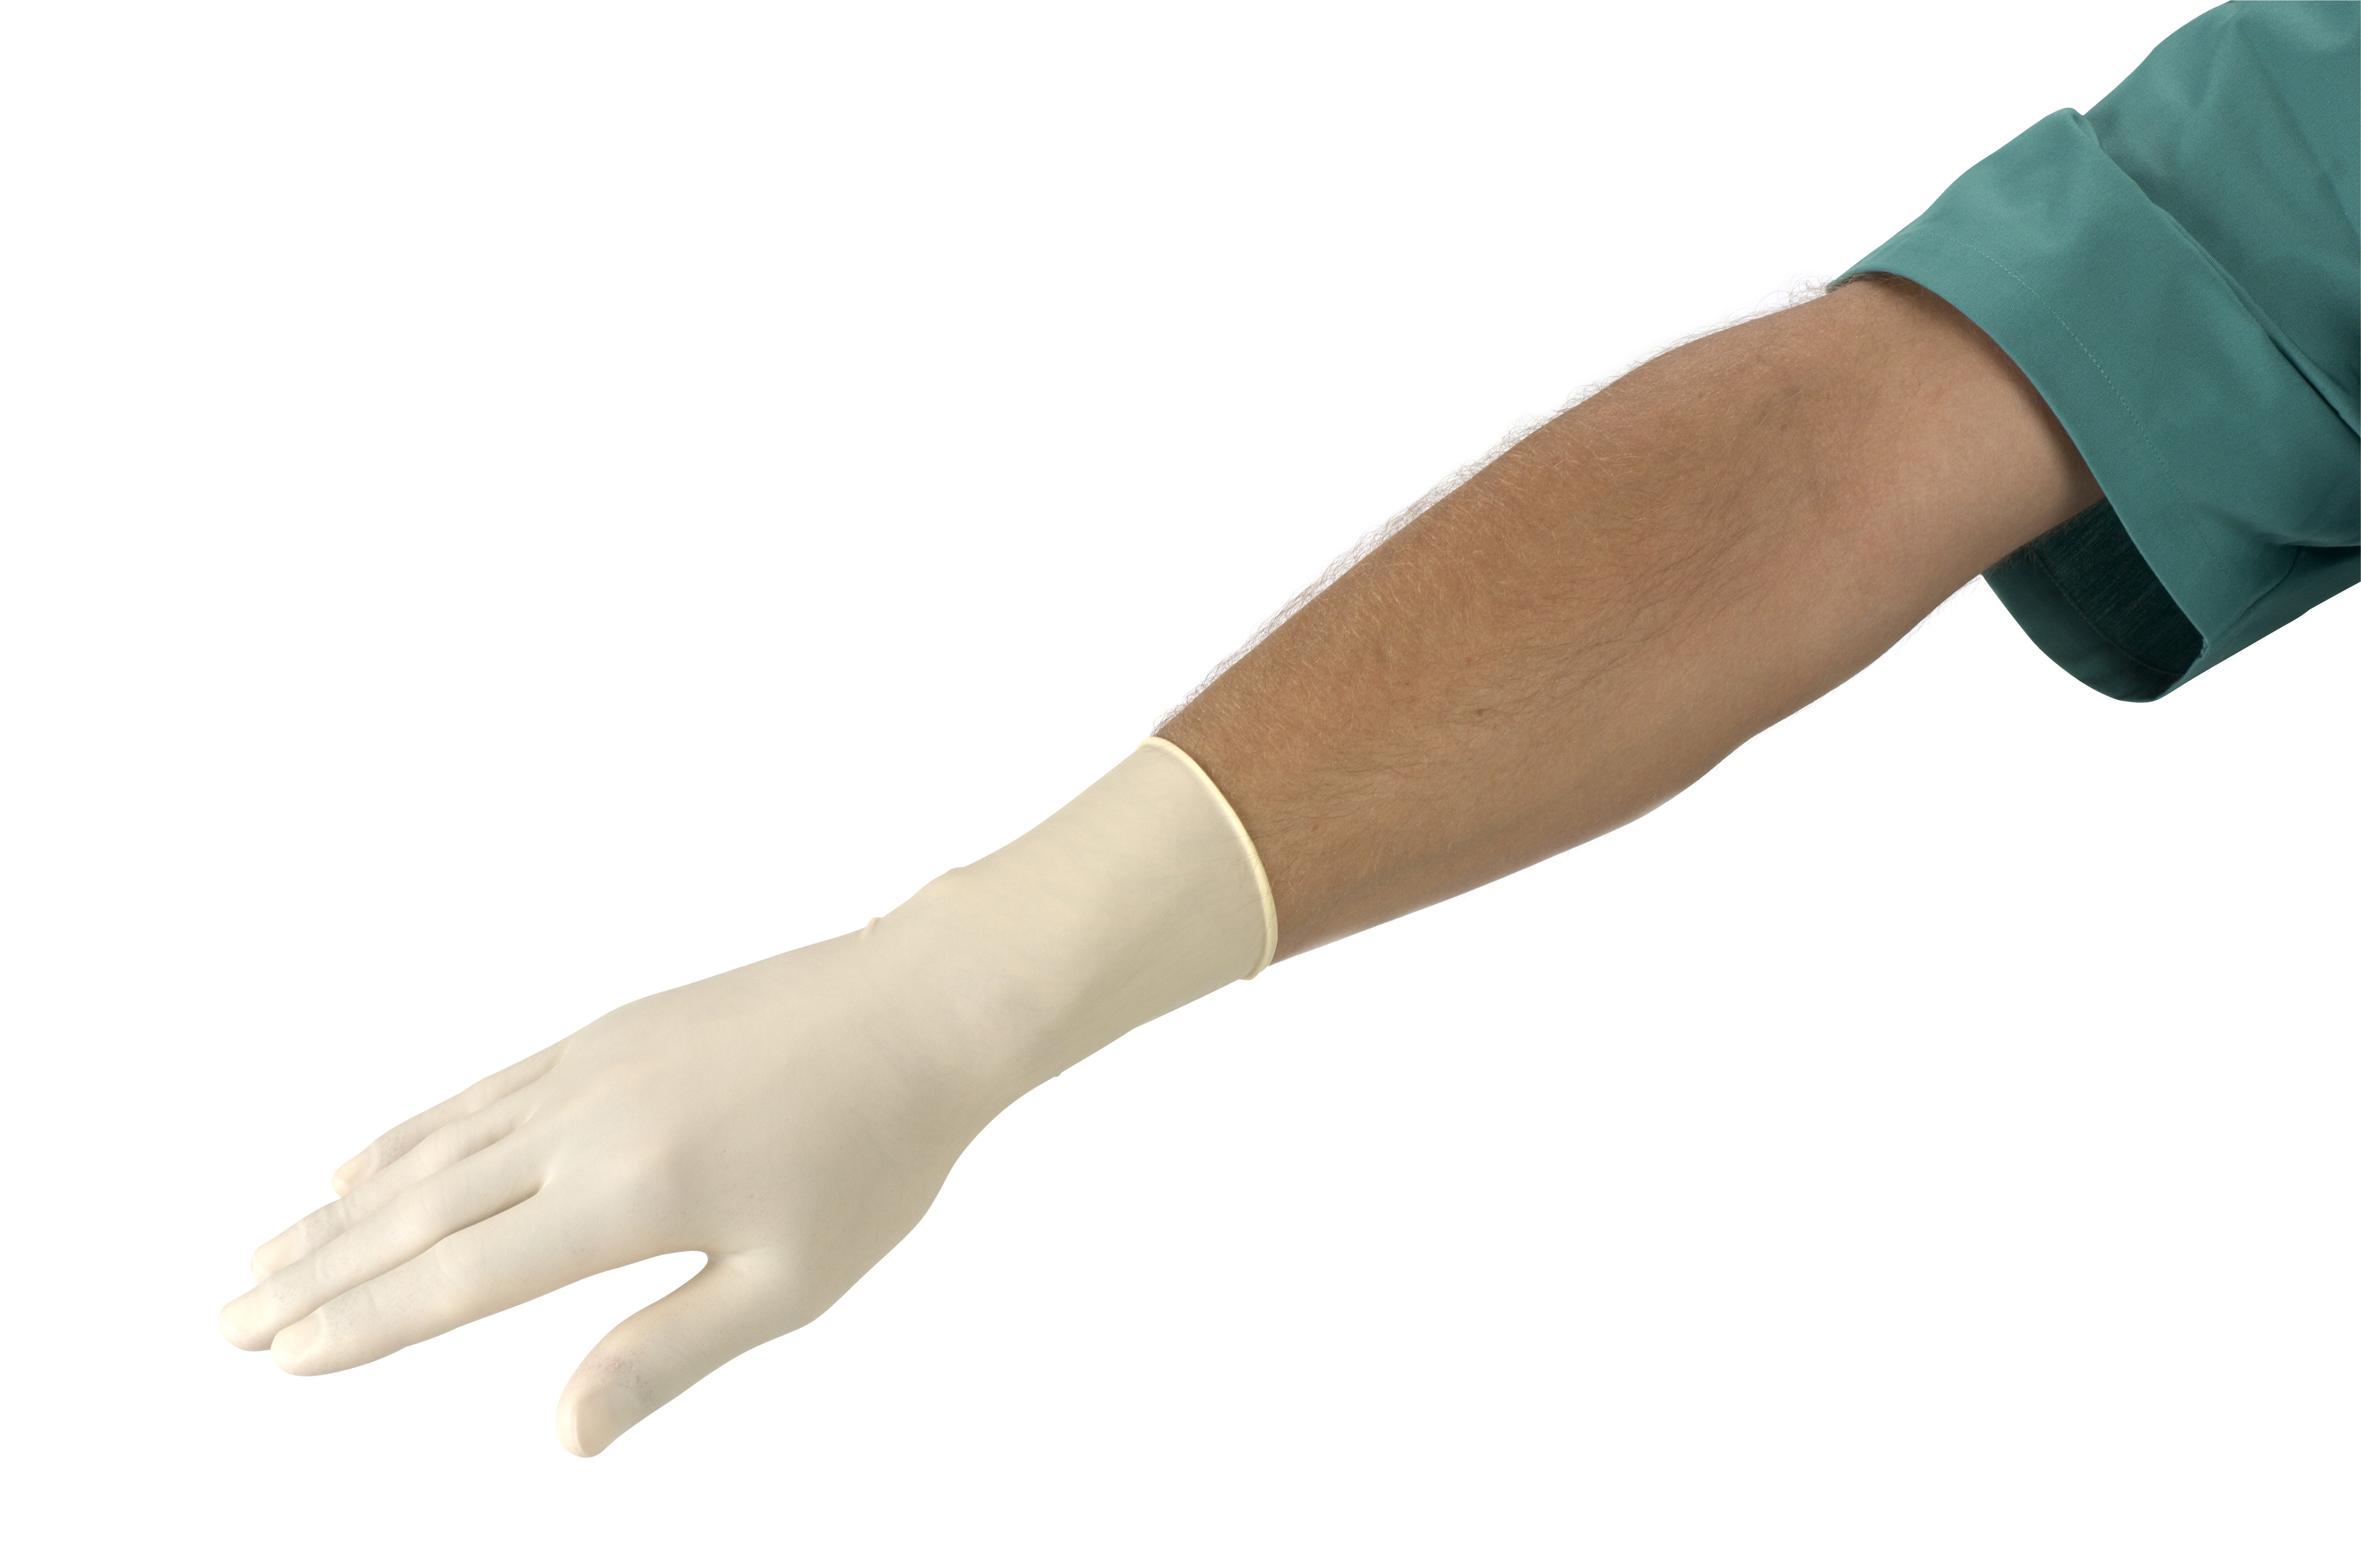 US -KRUTEX surgical gloves PF size 6.5, 50/pk